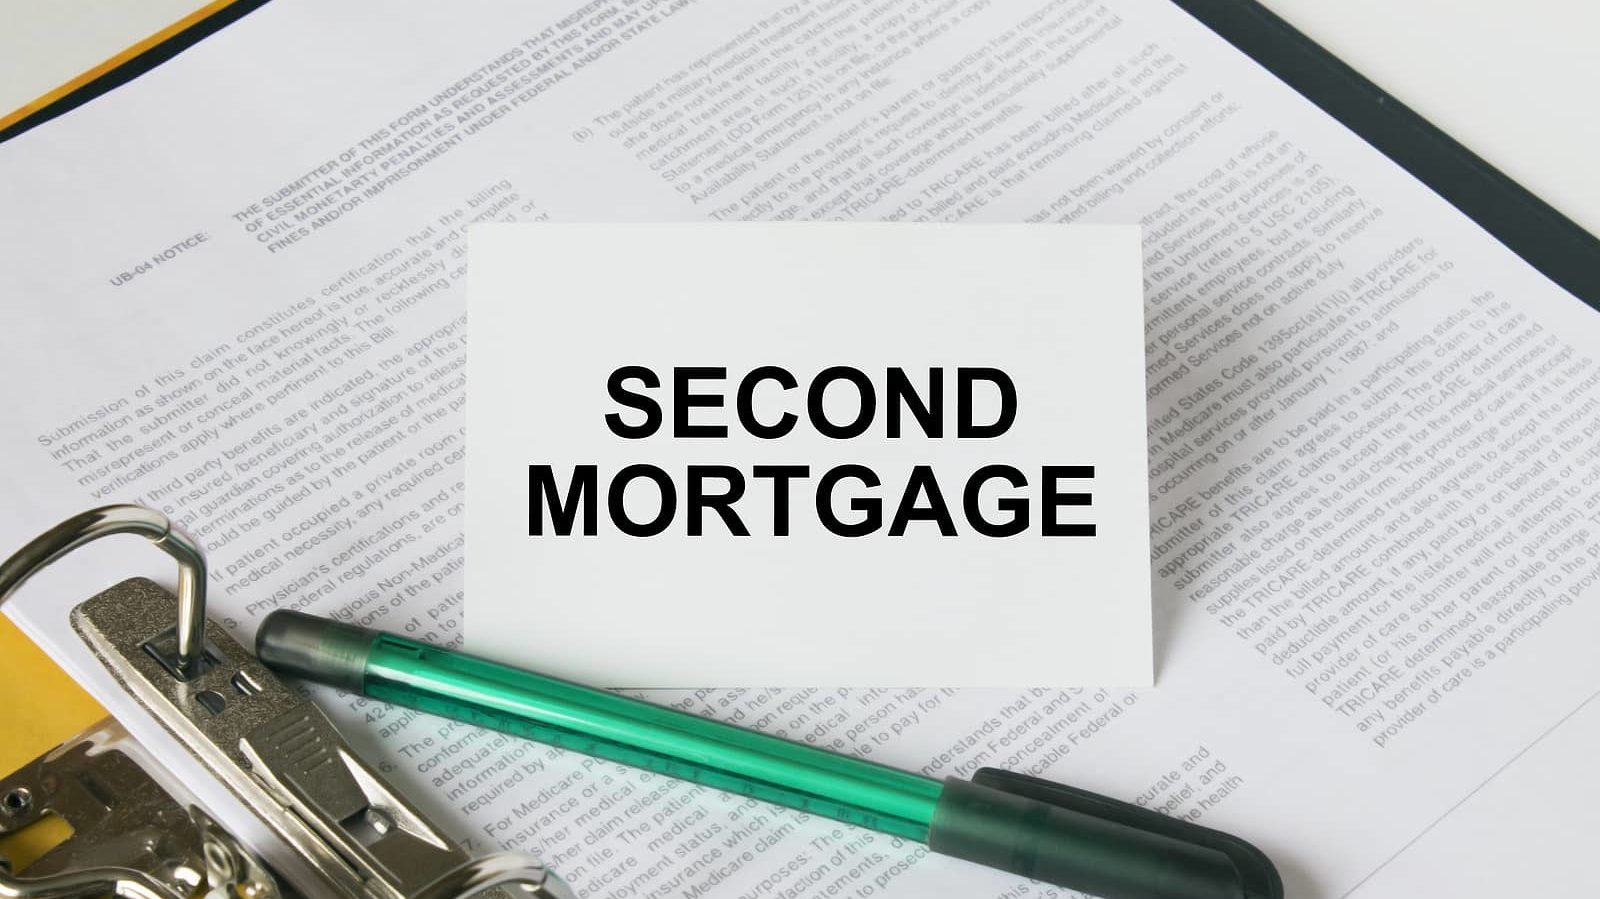 Get a Second Mortgage in Toronto, Ontario